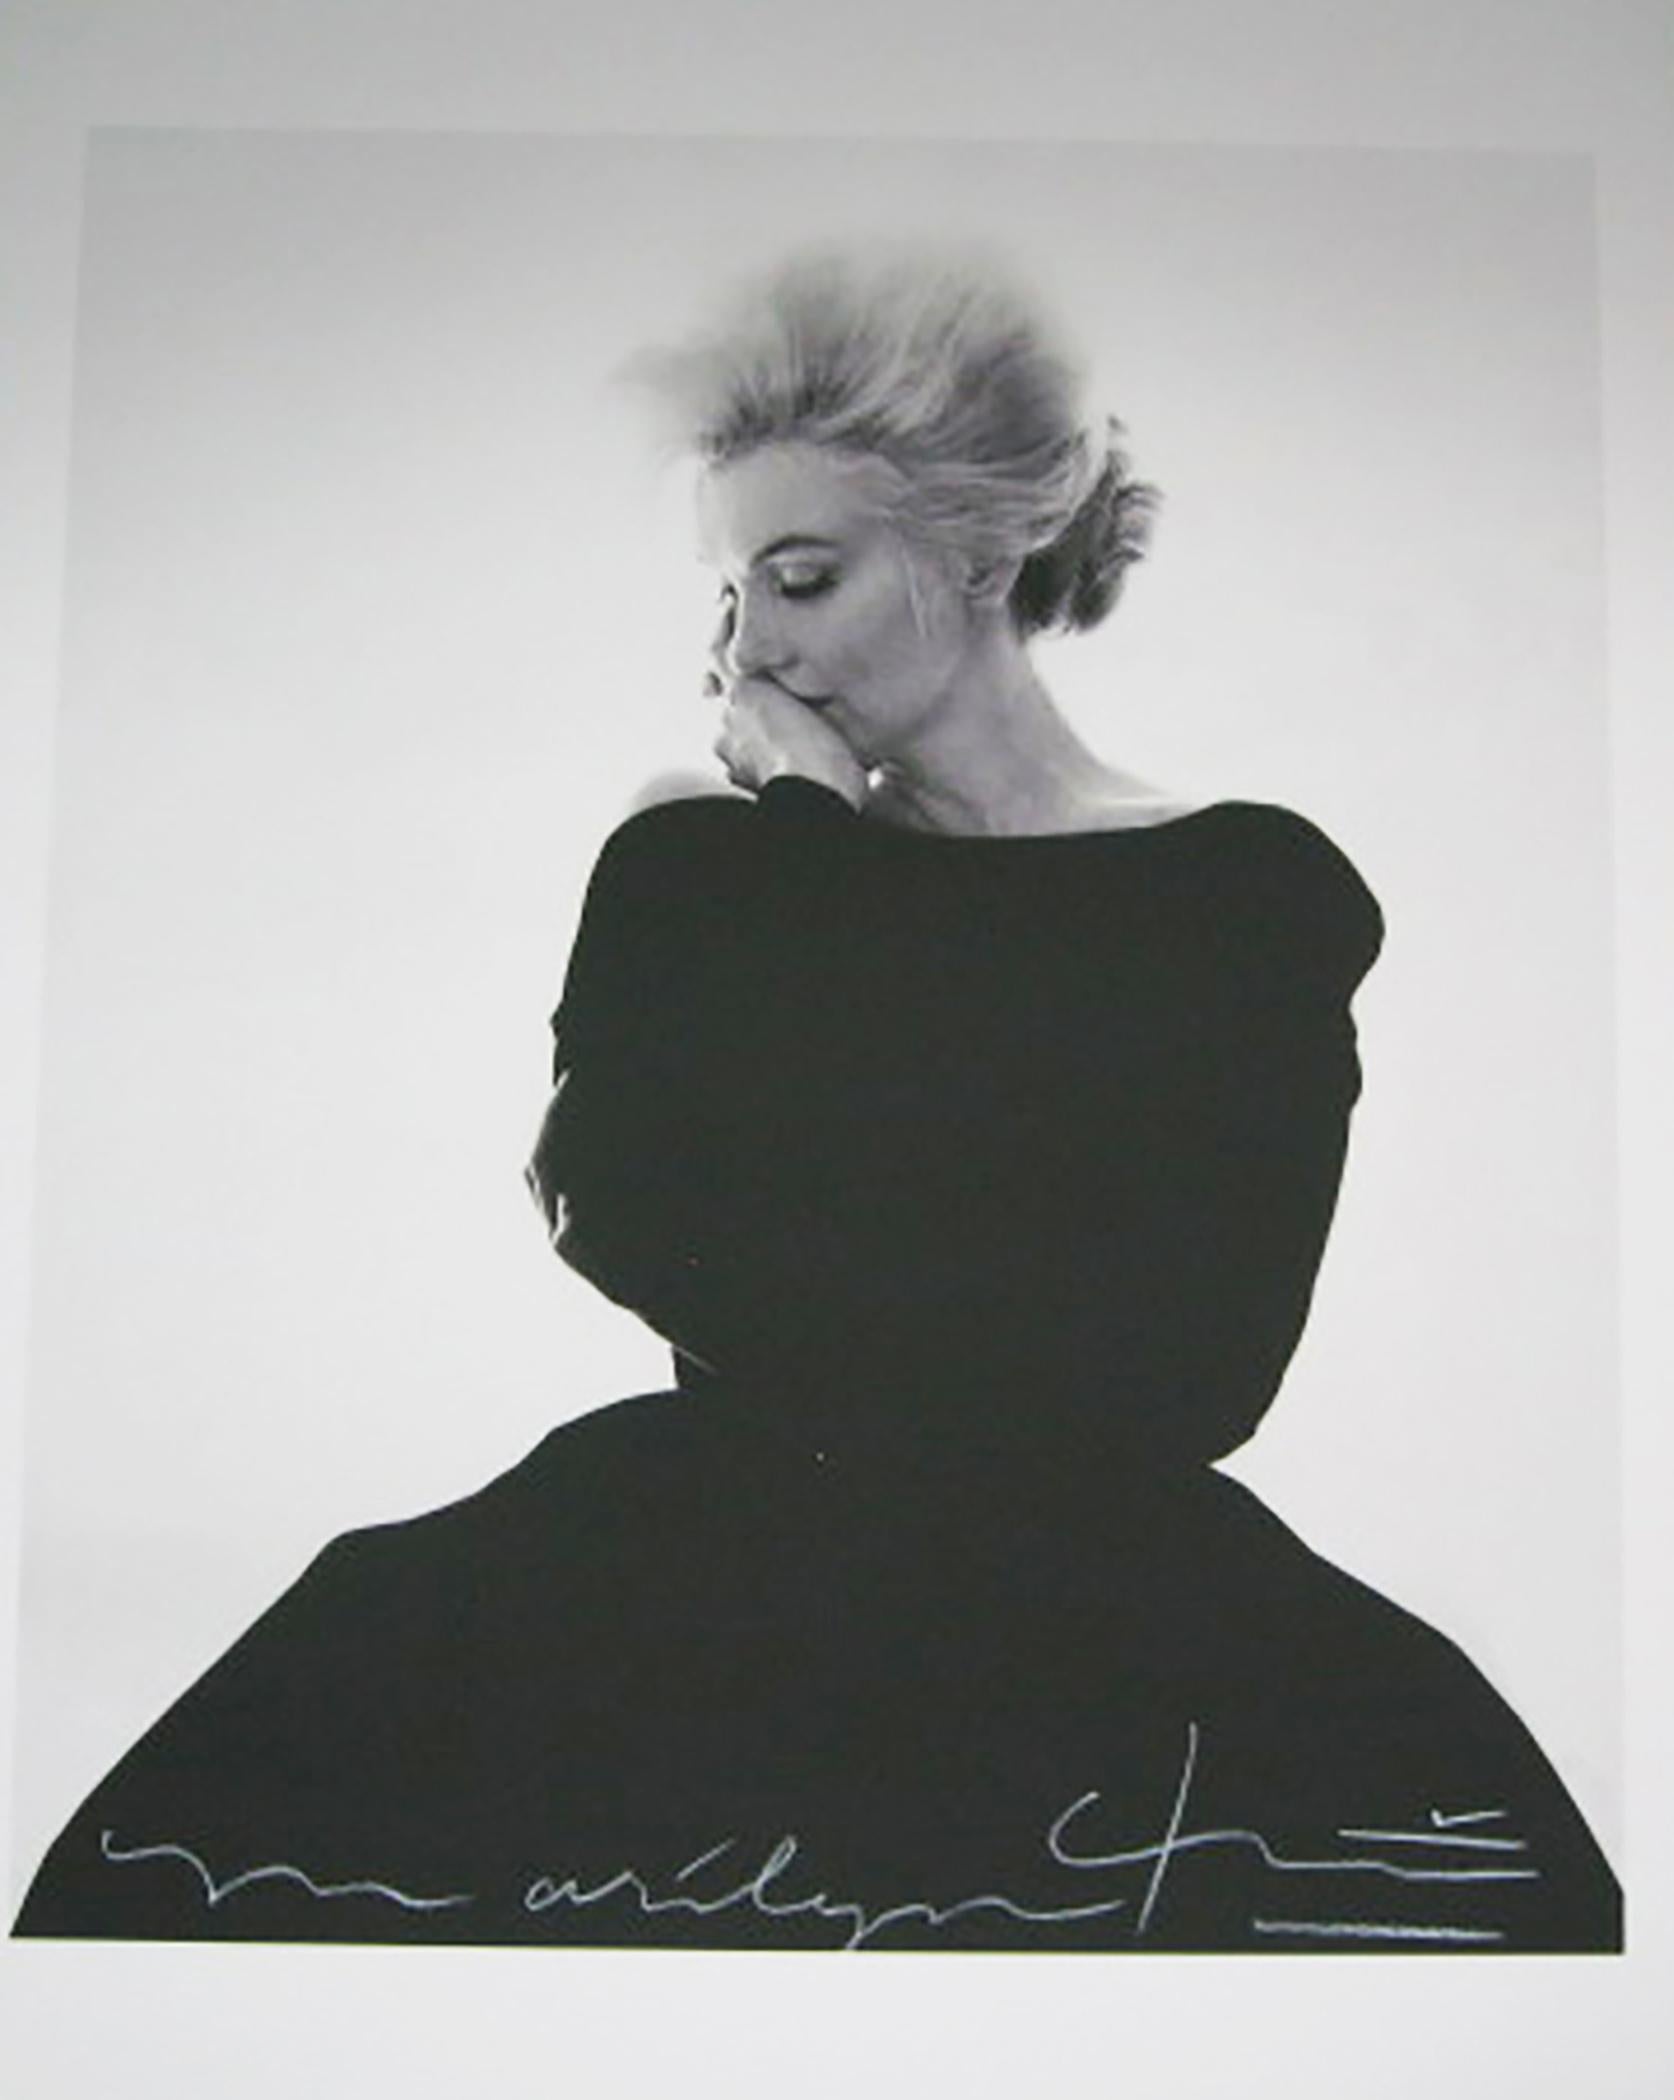 Bert stern
Marilyn in Vogue 
The last sitting (1962)
superb and large photo of Marilyn Monroe in Christian Dior's mythical black dress for Vogue magazine
photographic paper 
format 91 X61 cms
image 61 x 56 cms
signed and numbered out of 10 by the